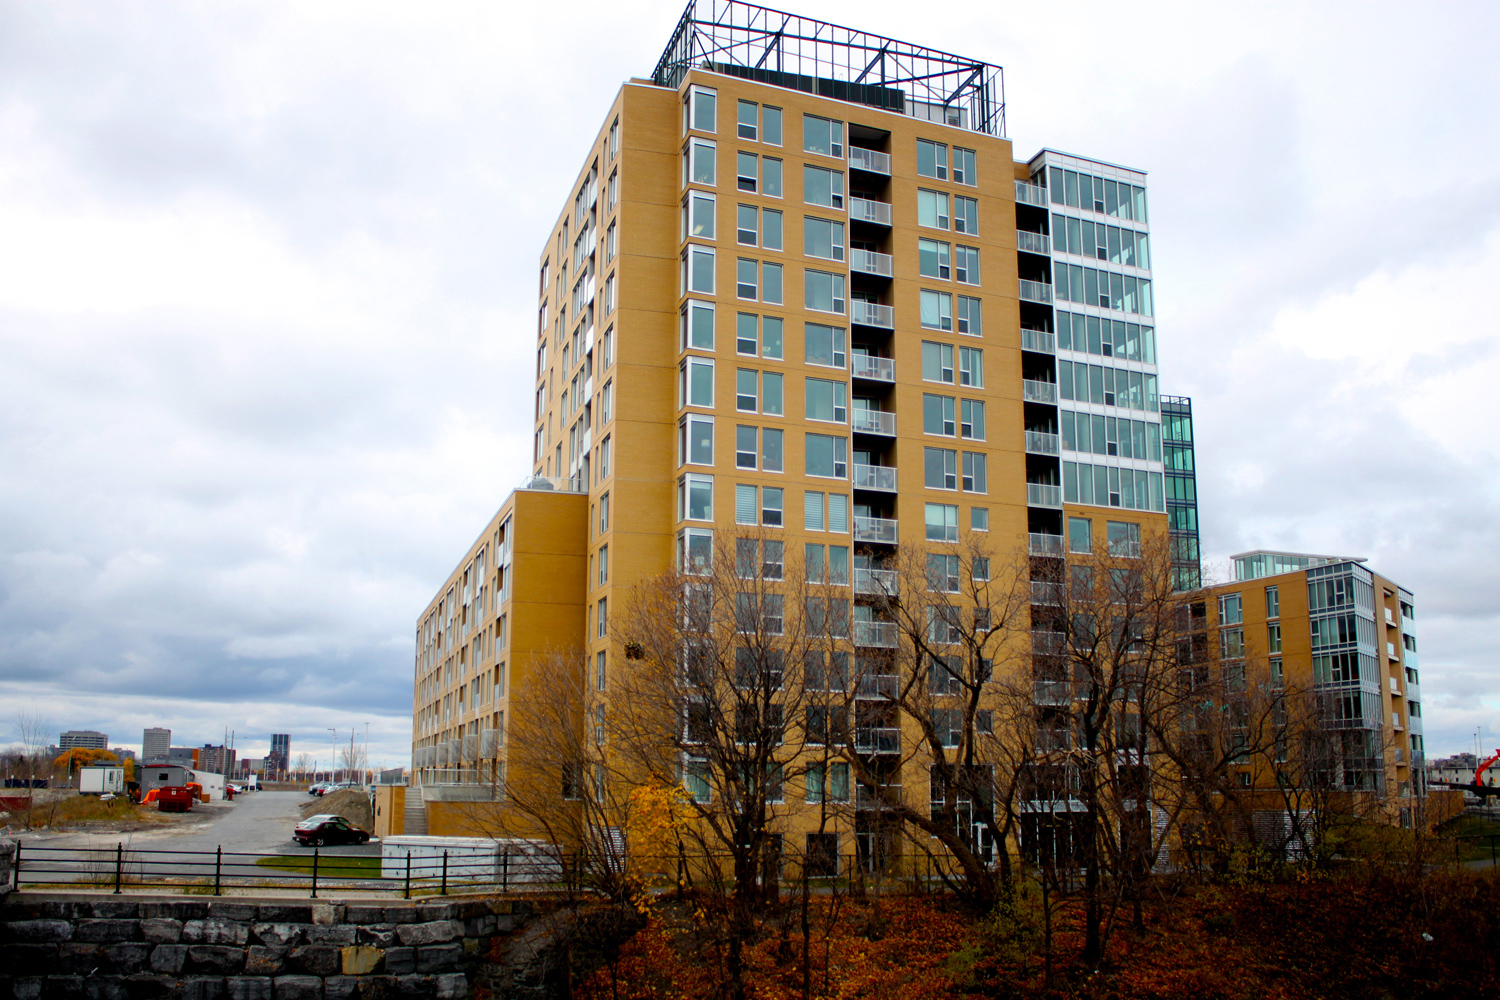 The Fusion project in LeBreton is one part of a multi-phase development by Claridge Condos